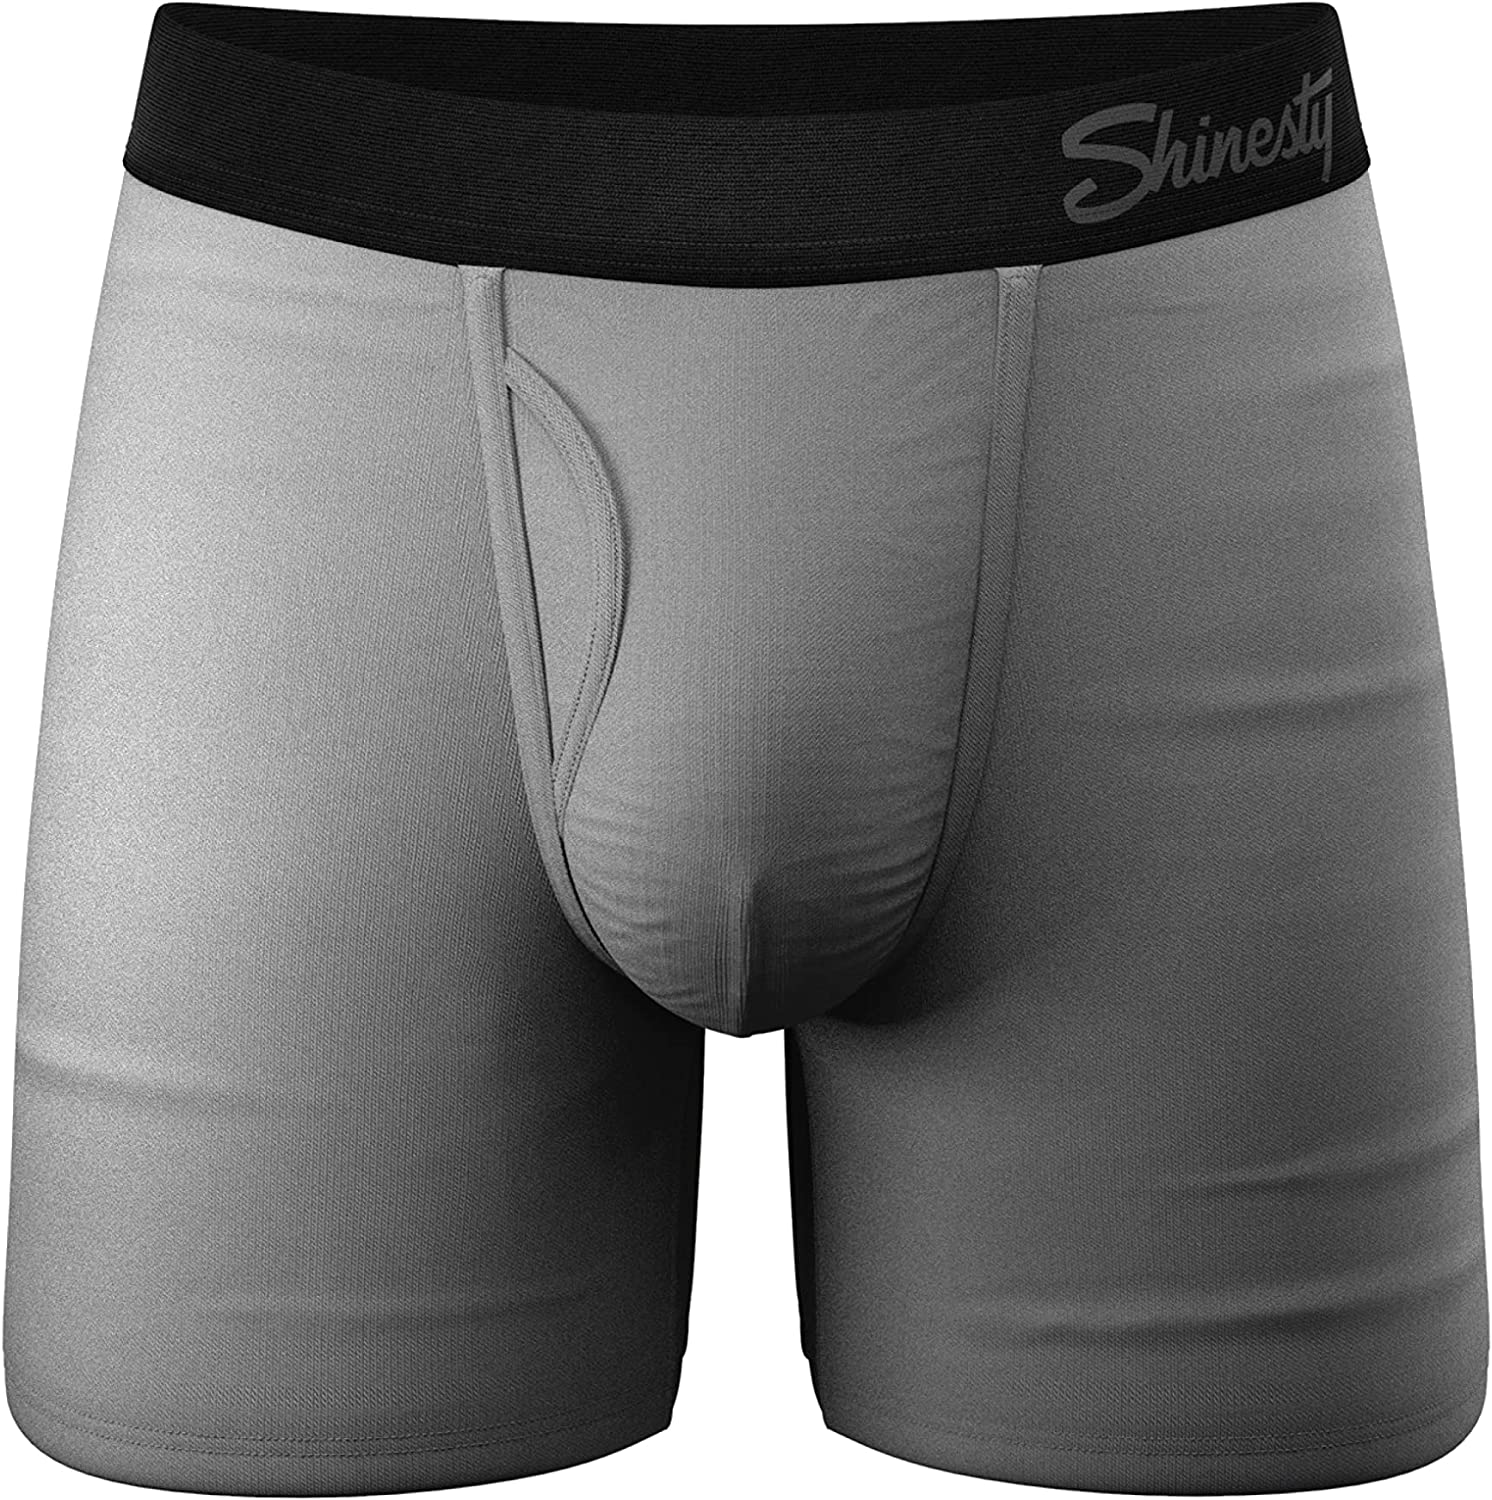 Shinesty Ball Hammock Pouch Underwear For Men Mens Underwear Boxer Briefs  with Fly Anti-chafing, Moisture Wicking, Breathable, Scrotal Support US  Large Thanksgiving 